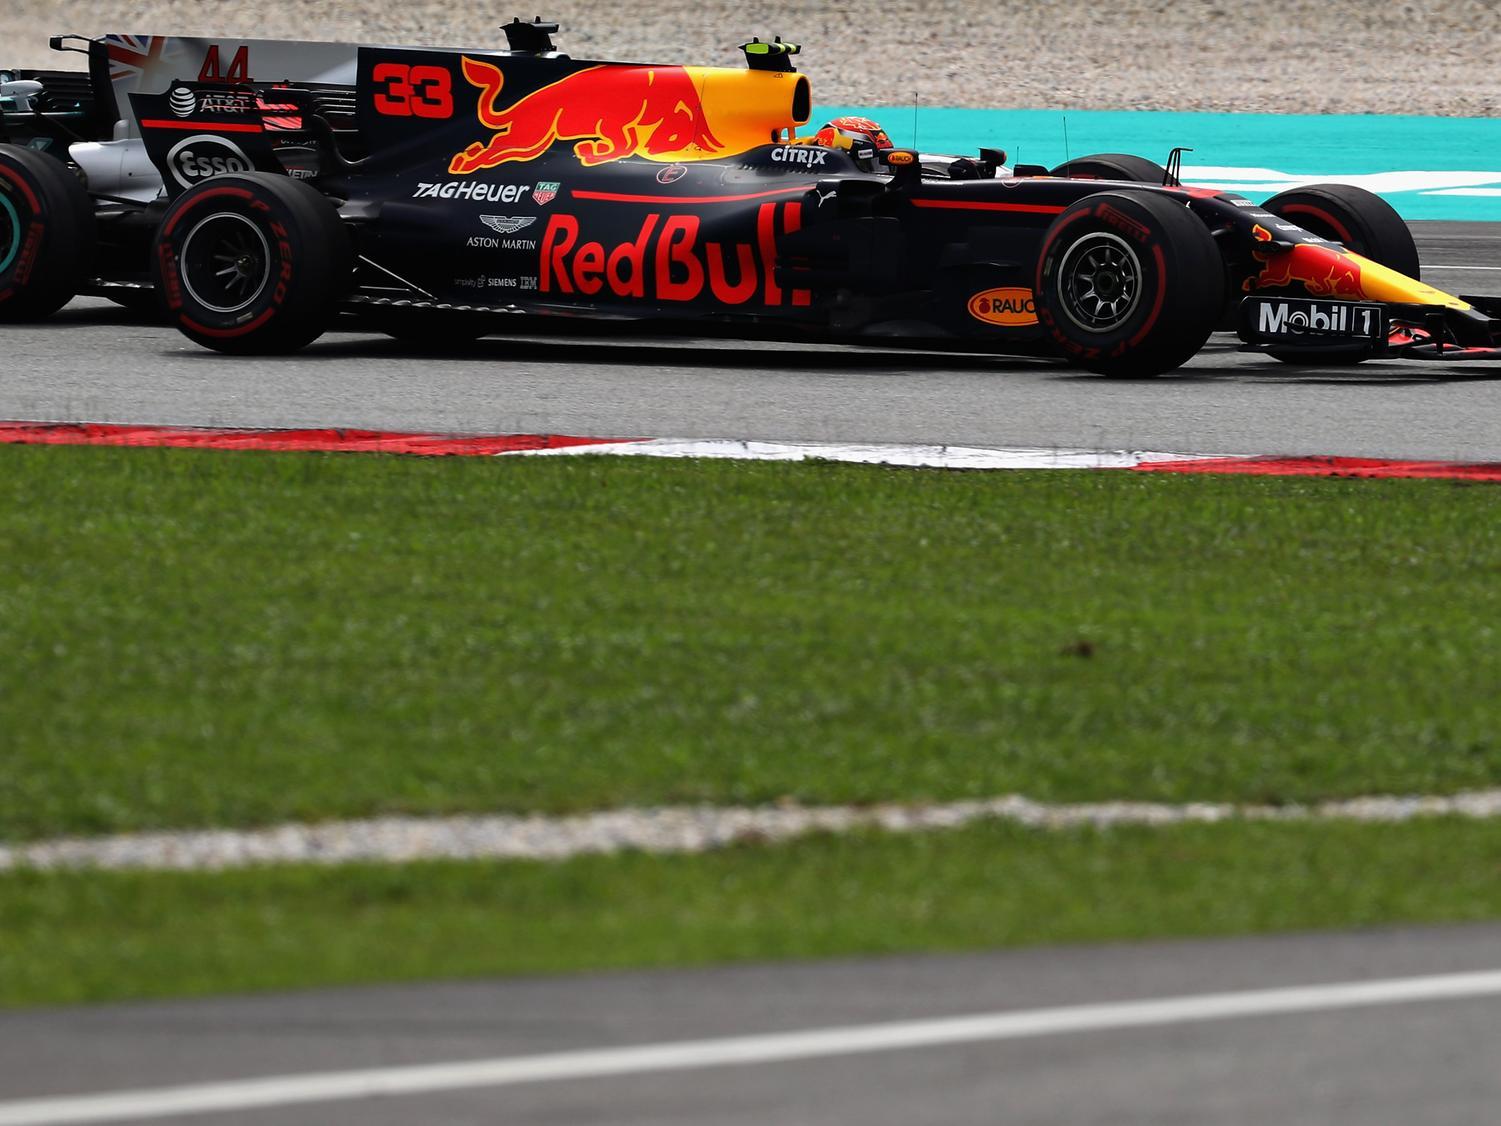 After the dramatics in the previous race in Singapore, Verstappen drove impeccably to win the next race in Malaysia.